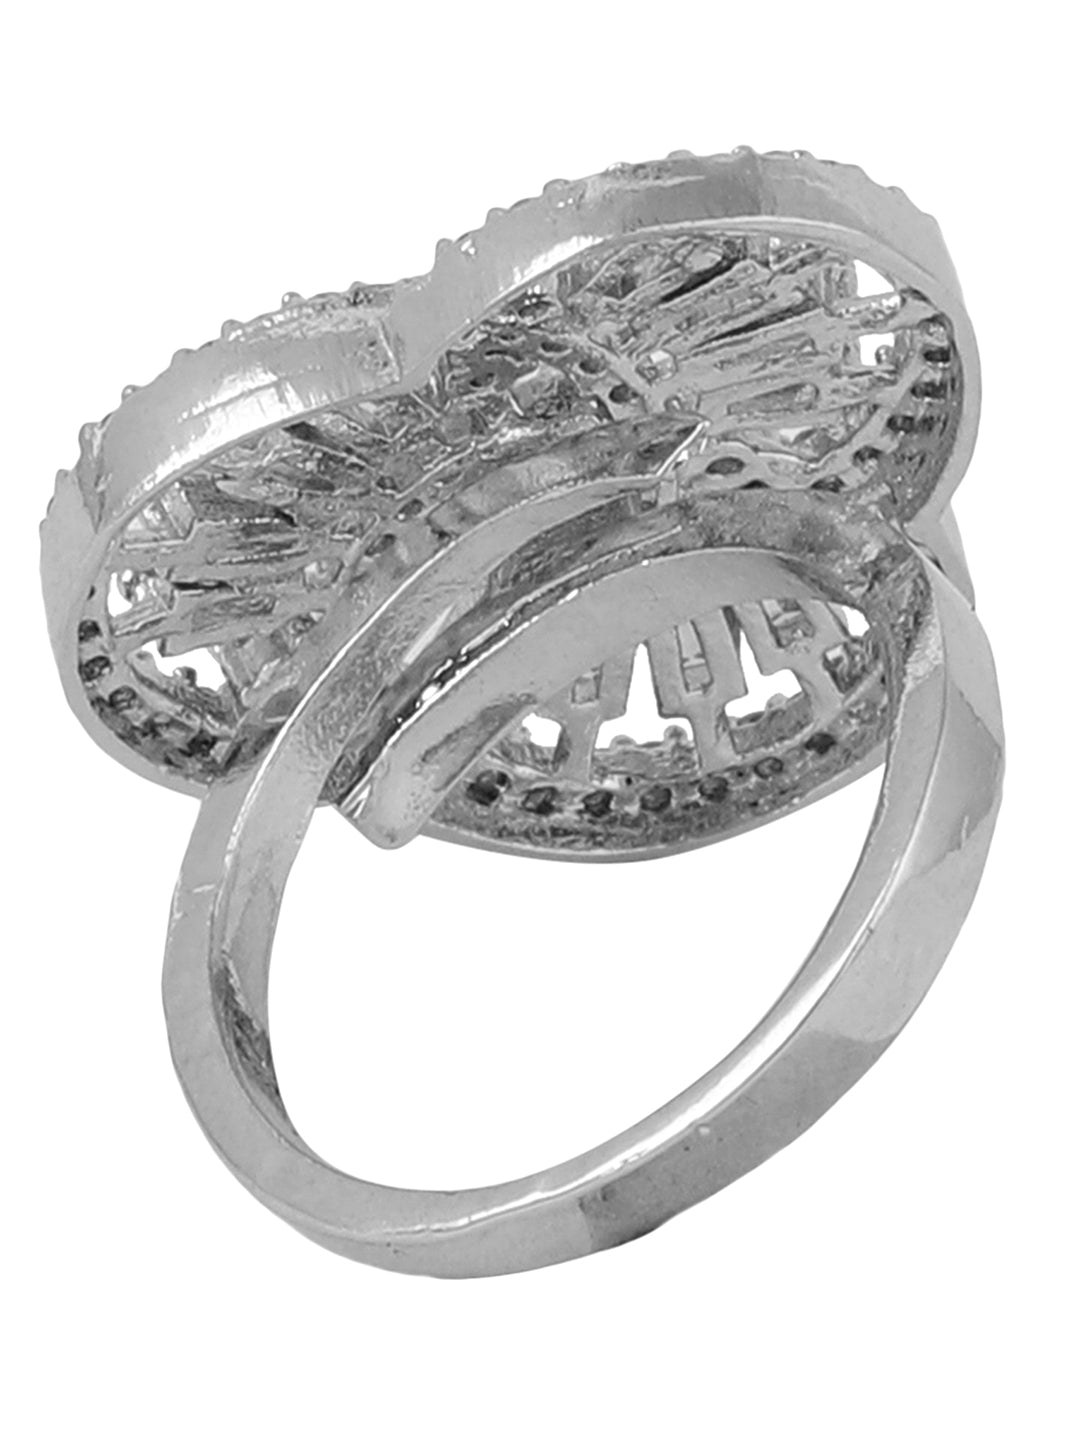 Women's Silver-Plated Ad Studded Circular Hand Crafted Adjustable Finger Ring - Anikas Creation